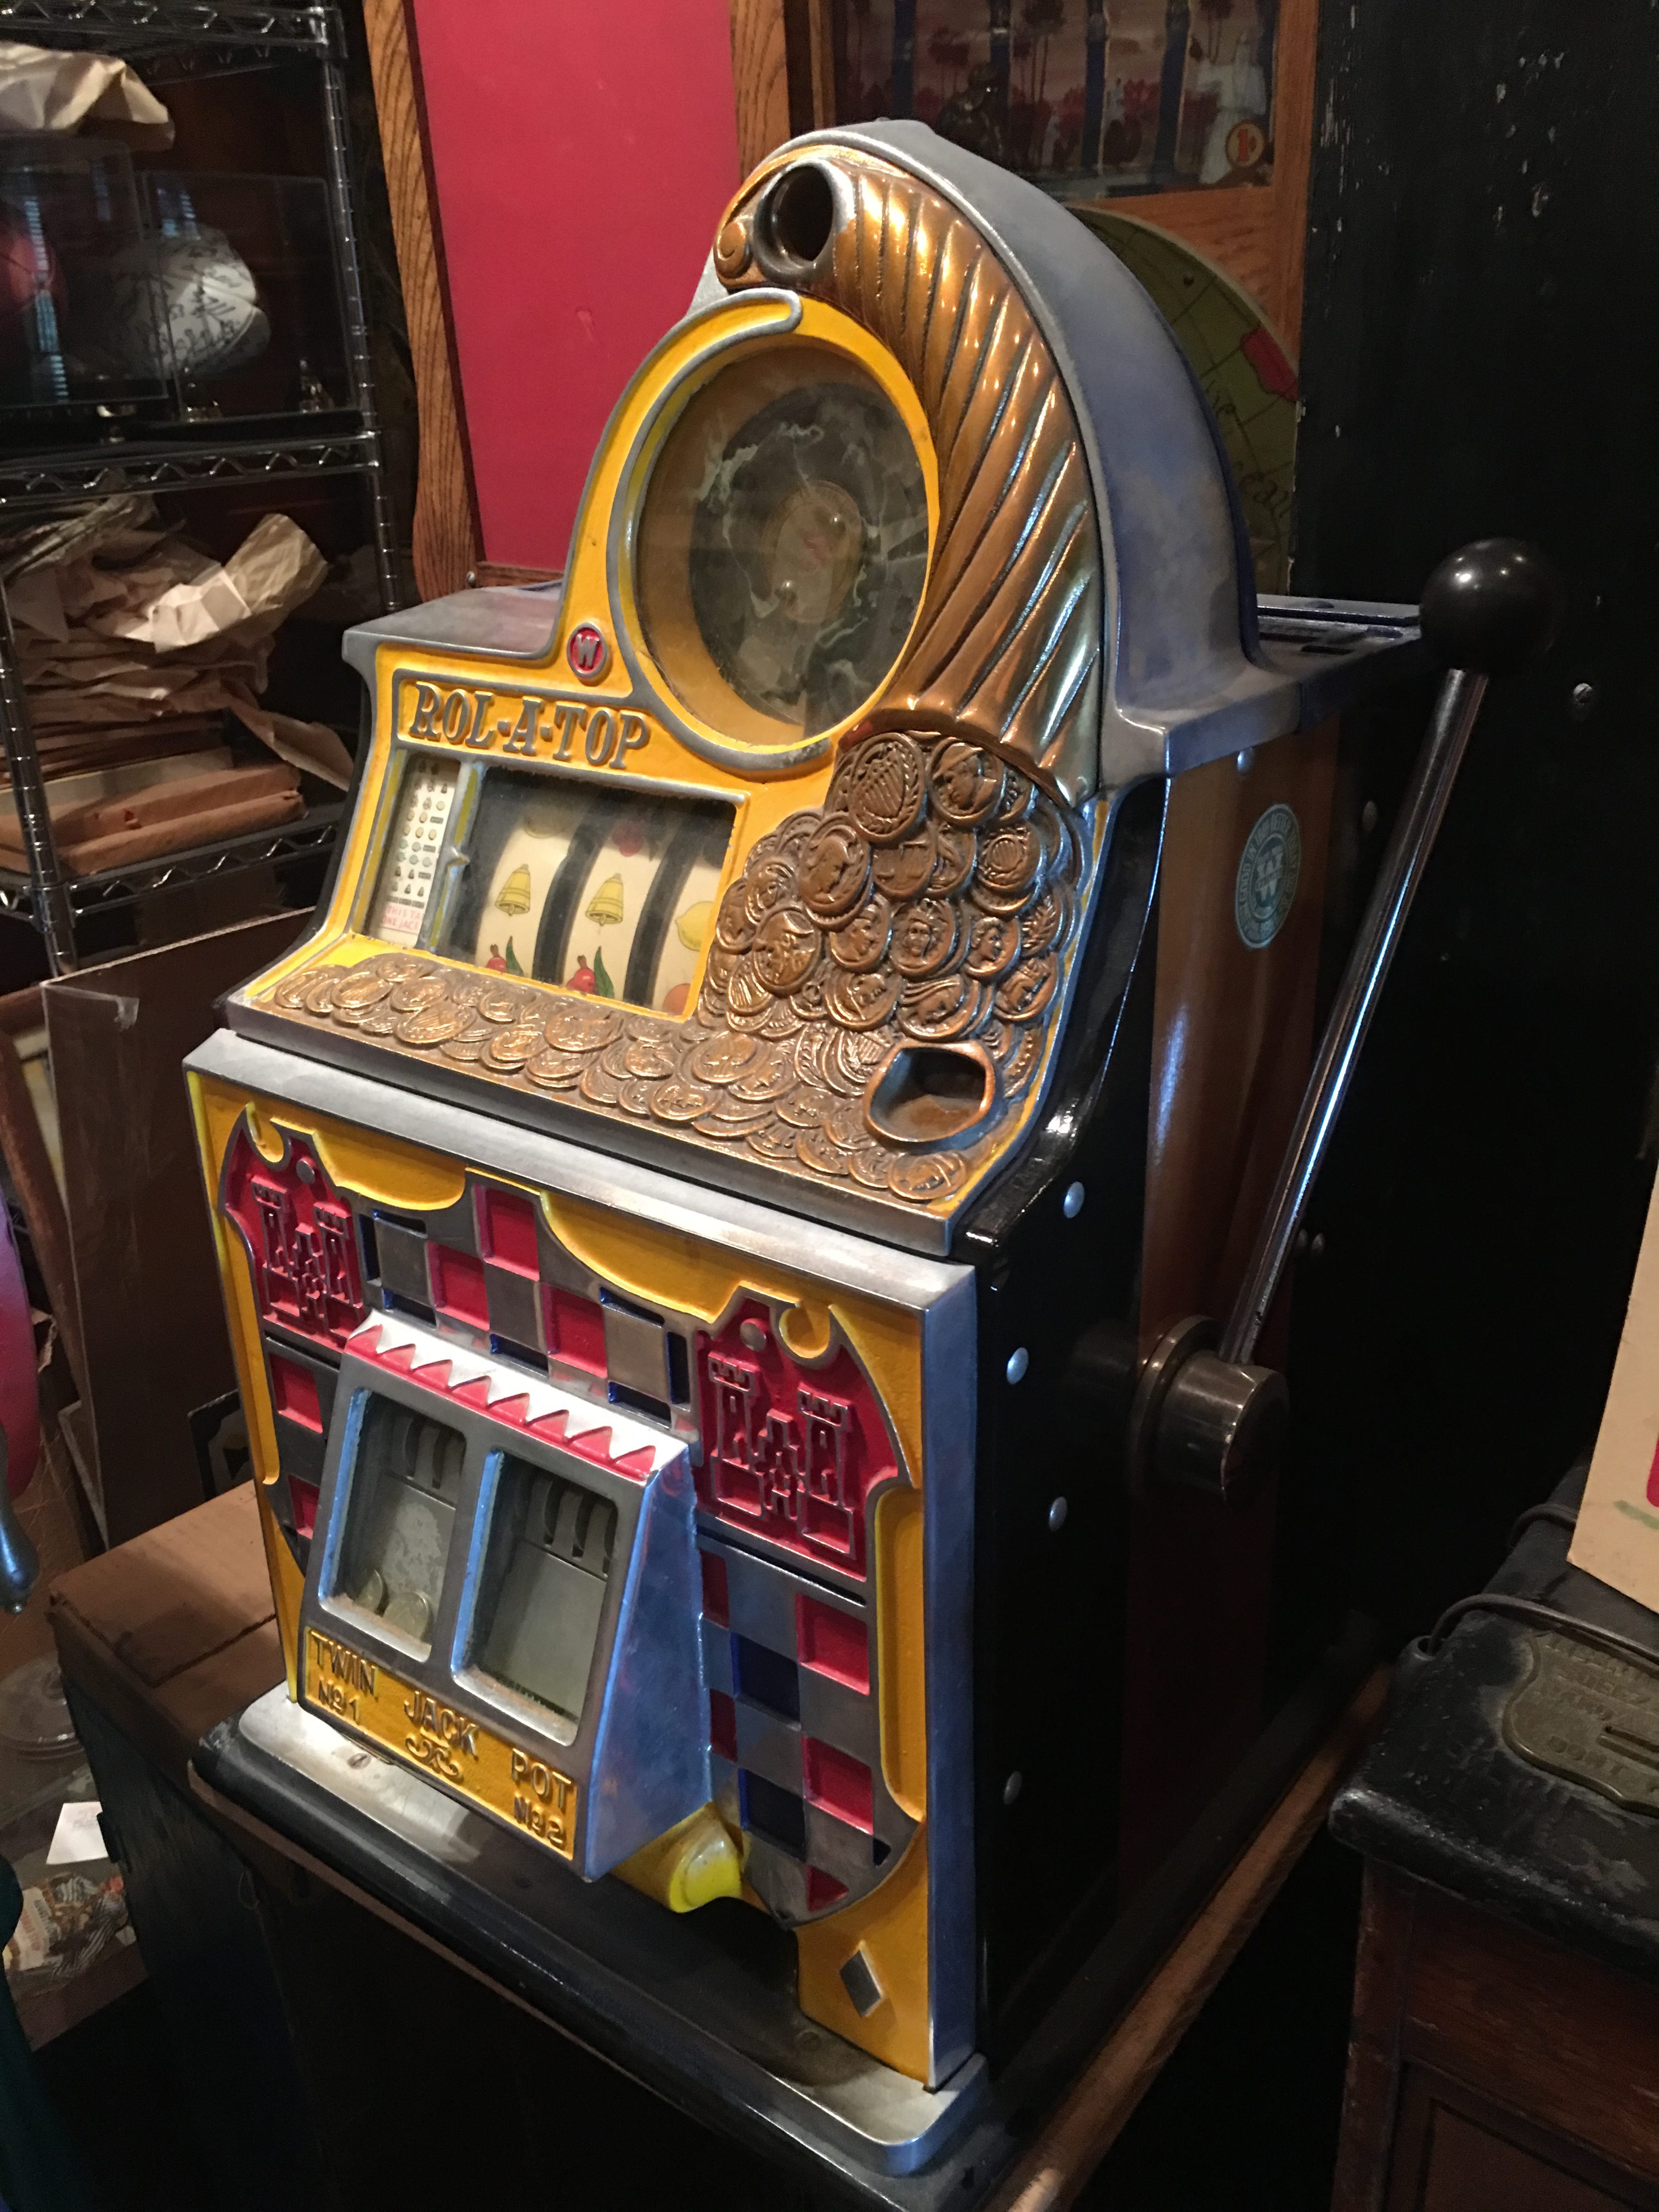 i can repair and service your antique or modern slot machine, in your home.20 years experience in coin op game repair.use the menu button at the top left for the contact page.please include your phone number and the type of slot machine you have.i will contact you as soon as possible to discuss getting your slot back to working order.